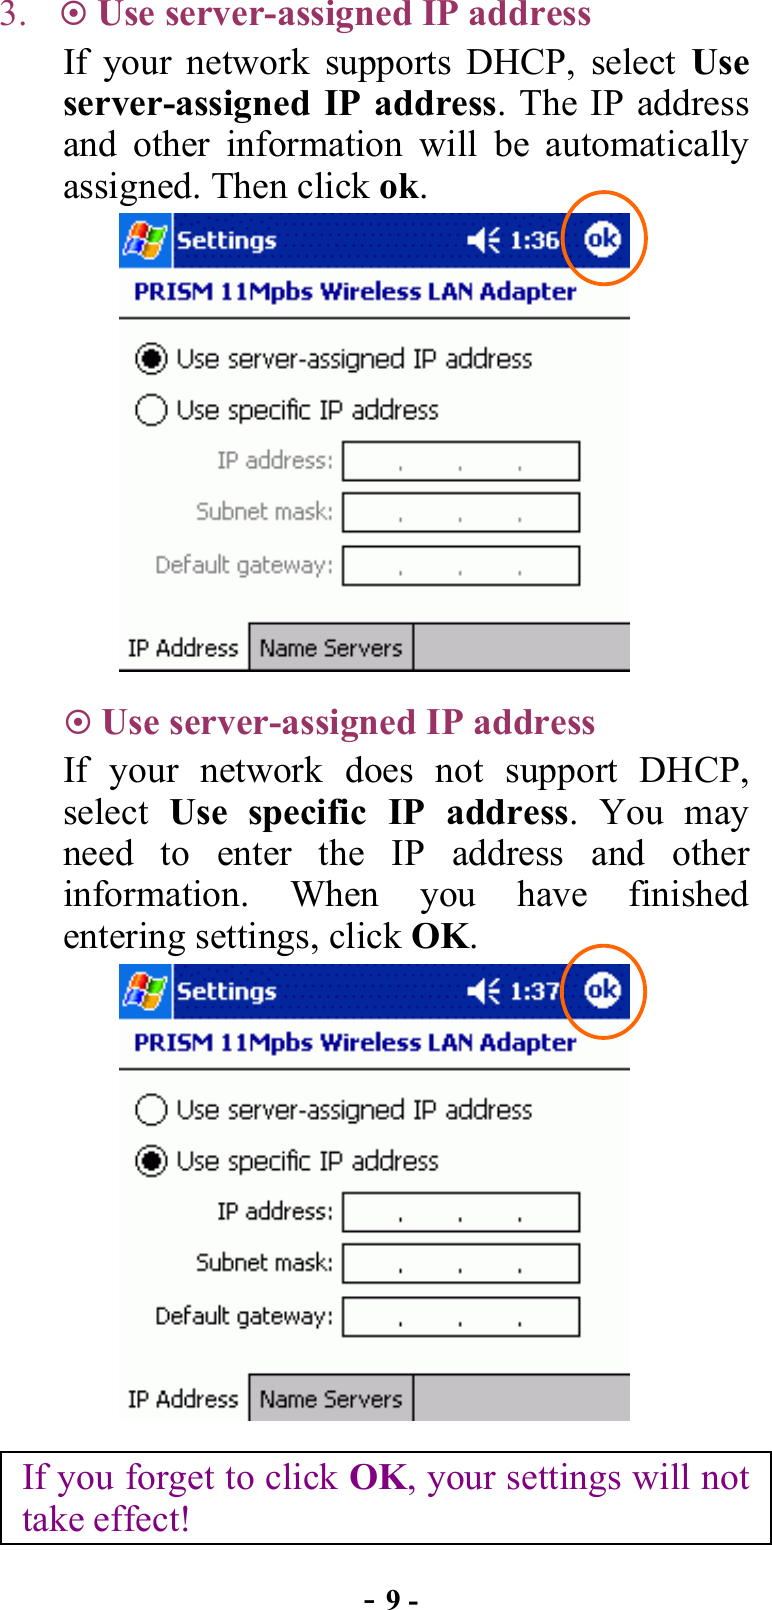  - 9 - 3.   Use server-assigned IP address If your network supports DHCP, select Use server-assigned IP address. The IP address and other information will be automatically assigned. Then click ok.   Use server-assigned IP address If your network does not support DHCP, select  Use specific IP address. You may need to enter the IP address and other information. When you have finished entering settings, click OK.  If you forget to click OK, your settings will not take effect! 